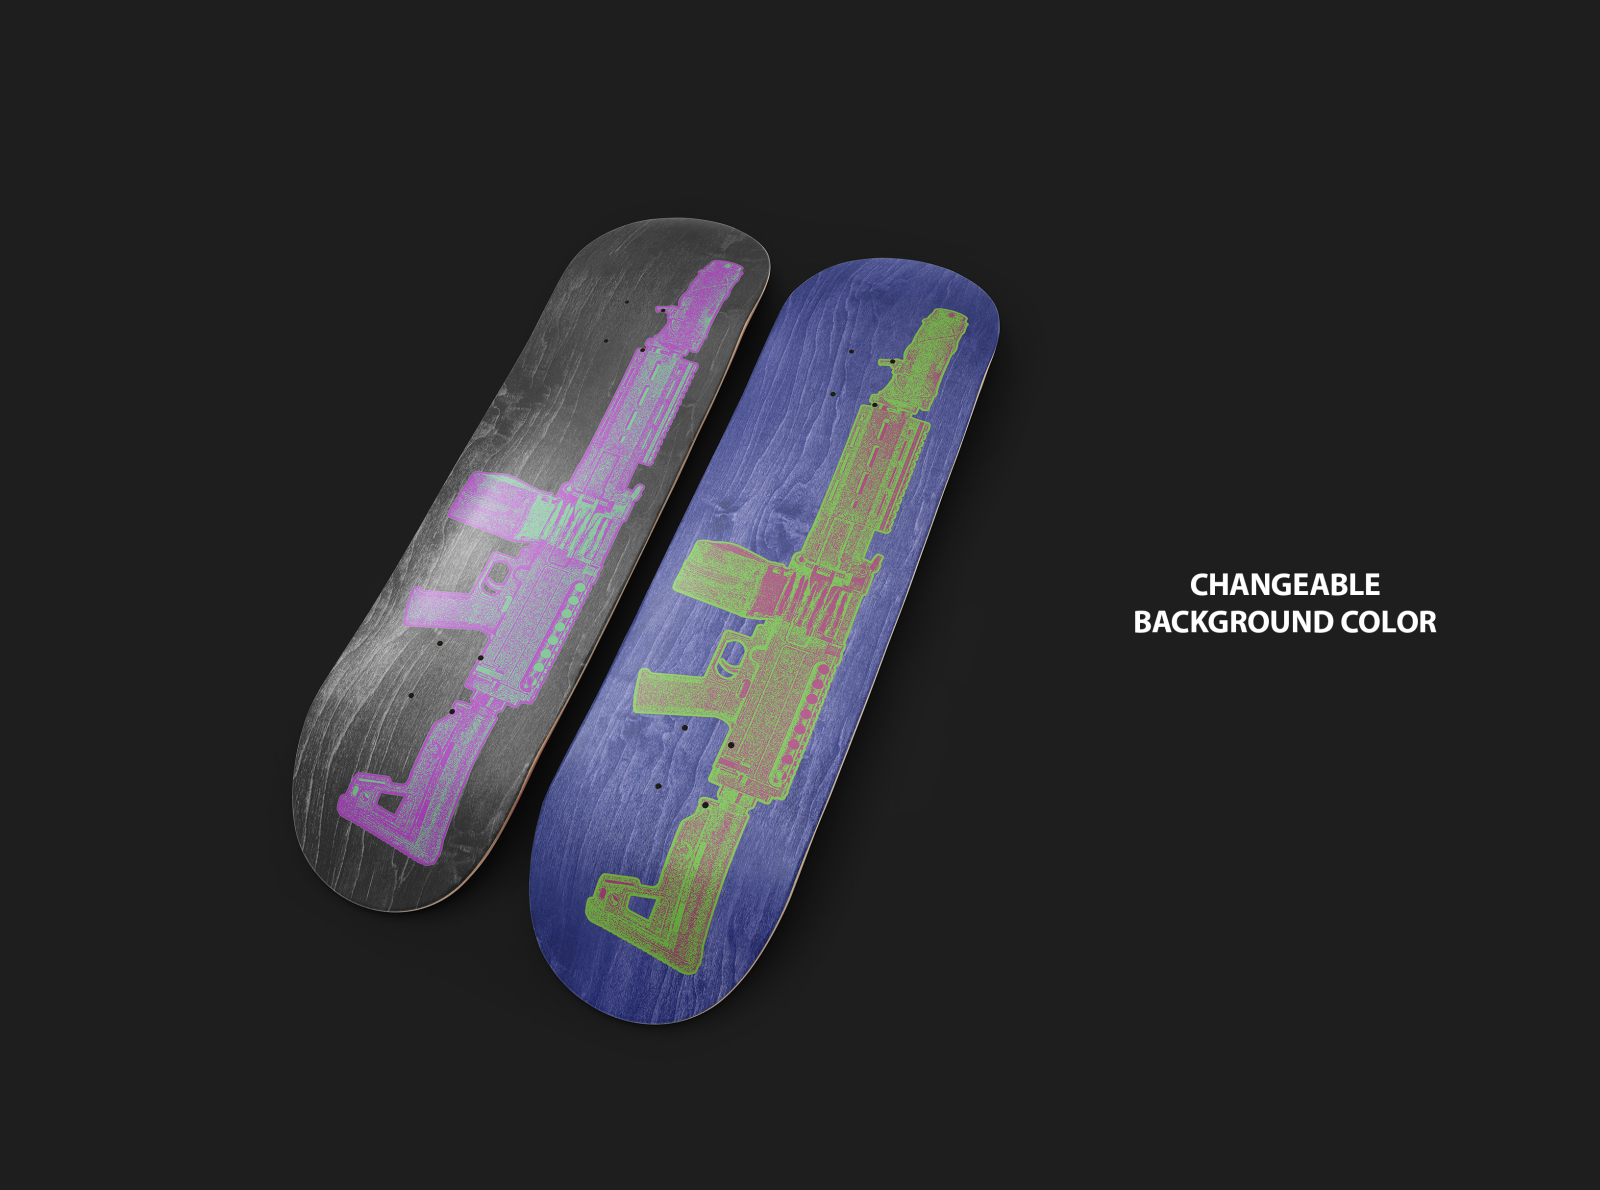 Realistic Skateboard Deck Mockup 6 by Uncentrifuged Pressure on Dribbble